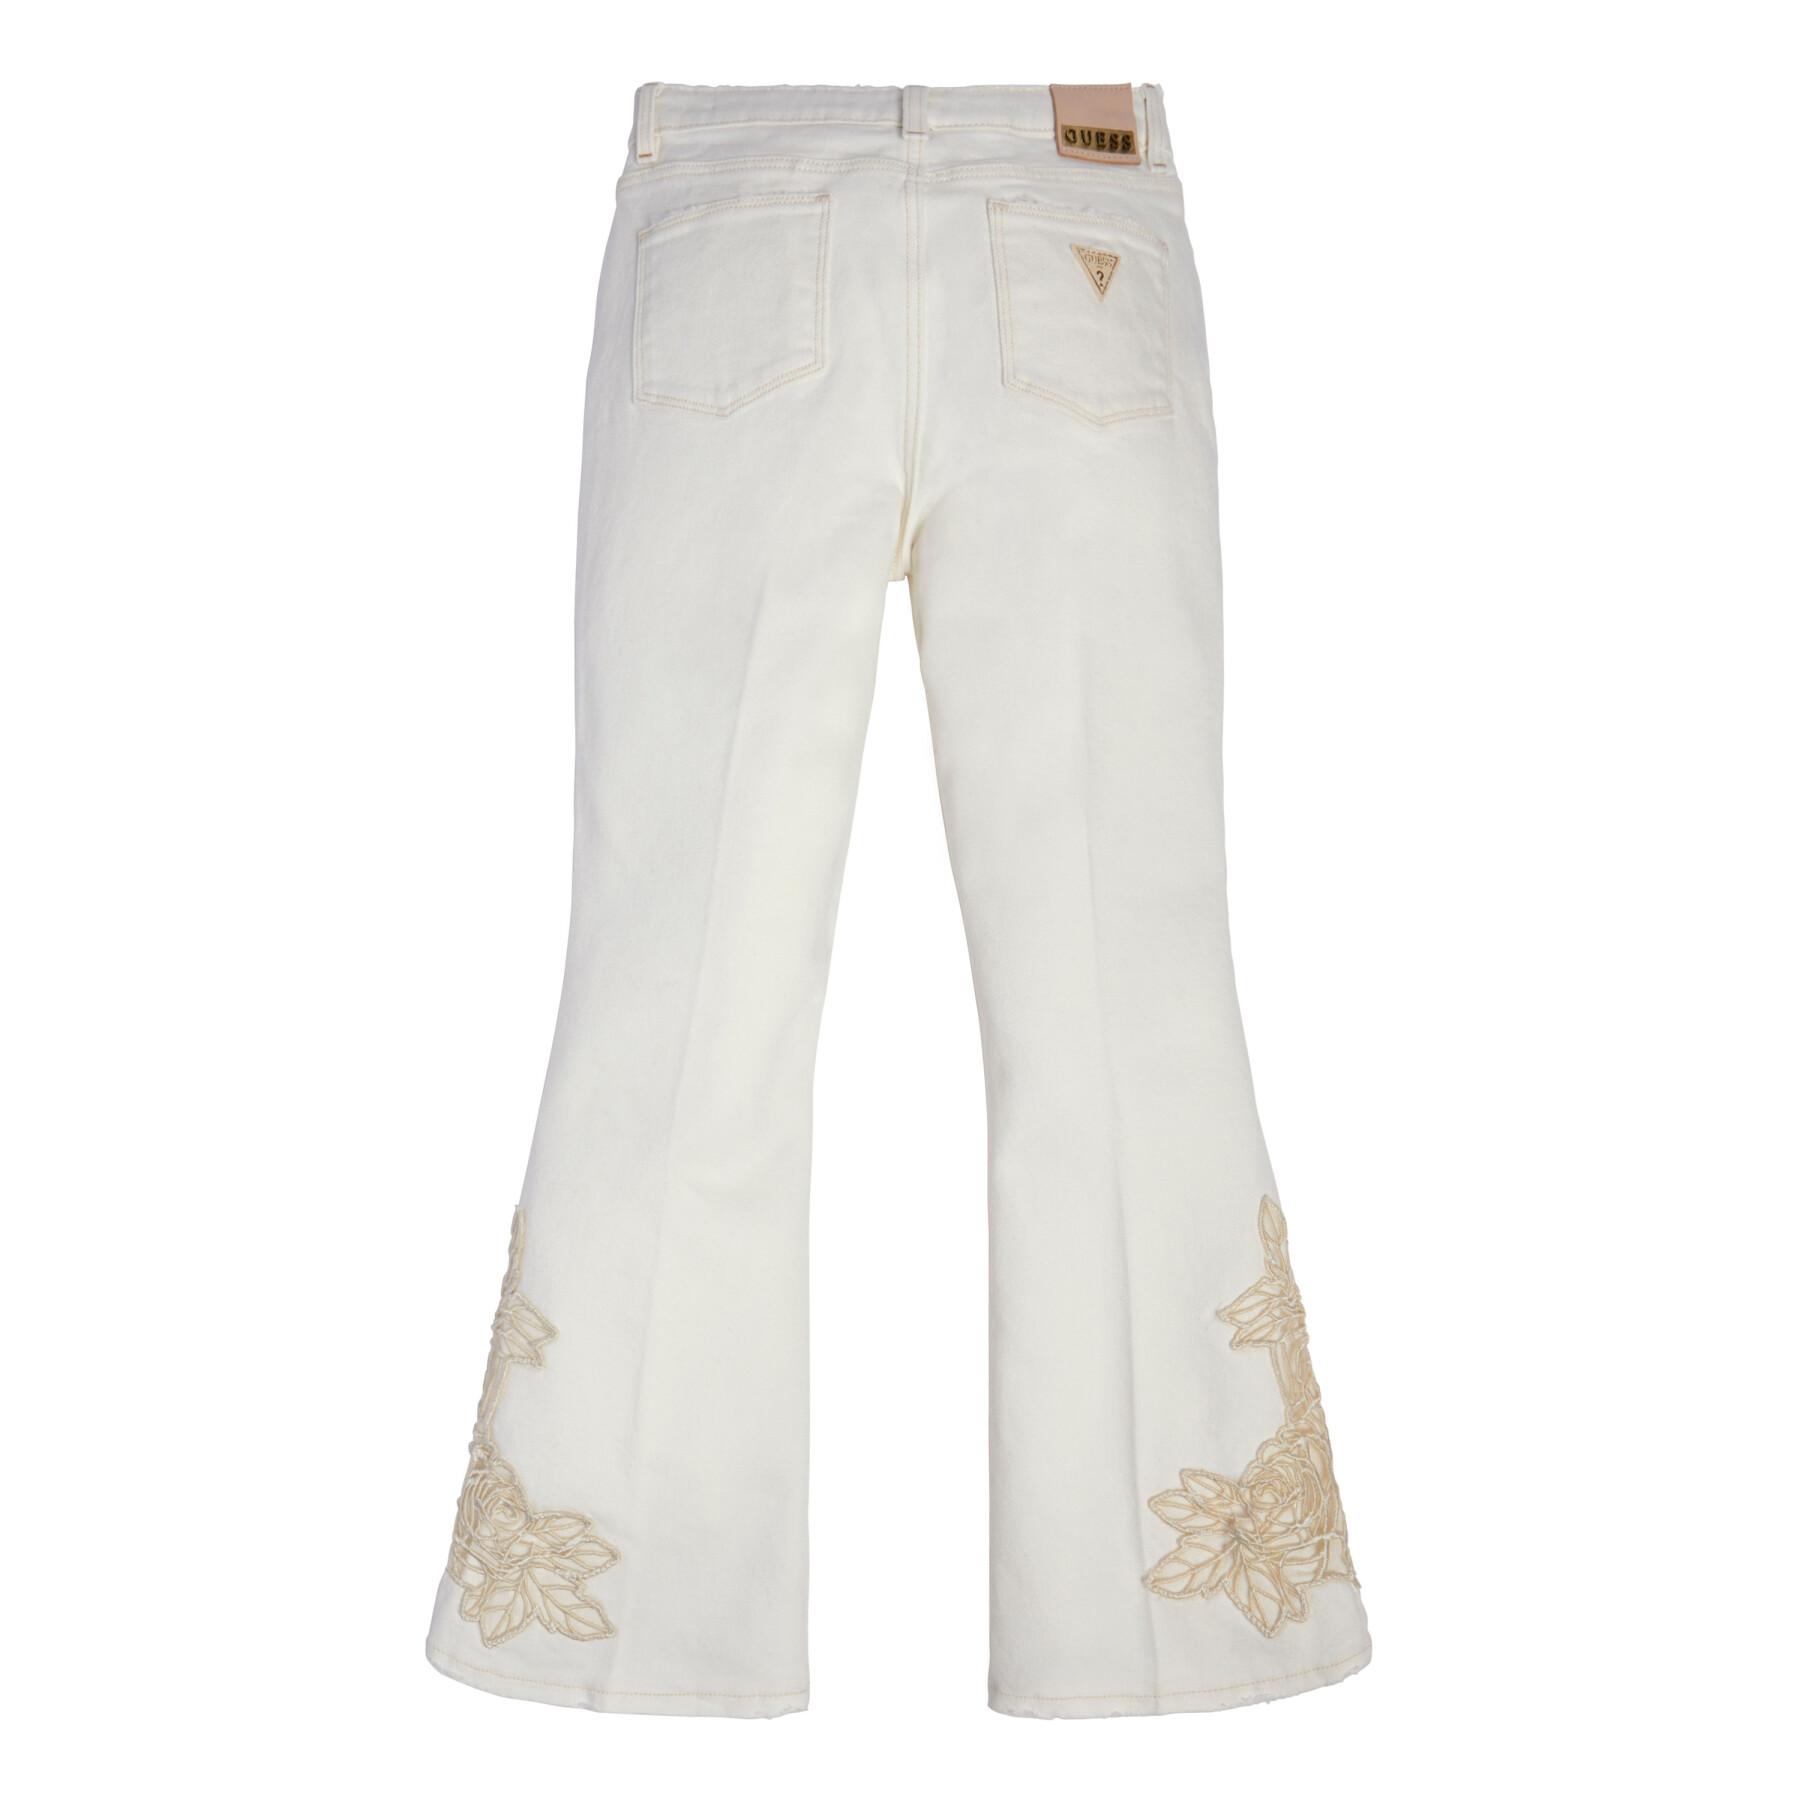 Jeans flare hija Guess Flare